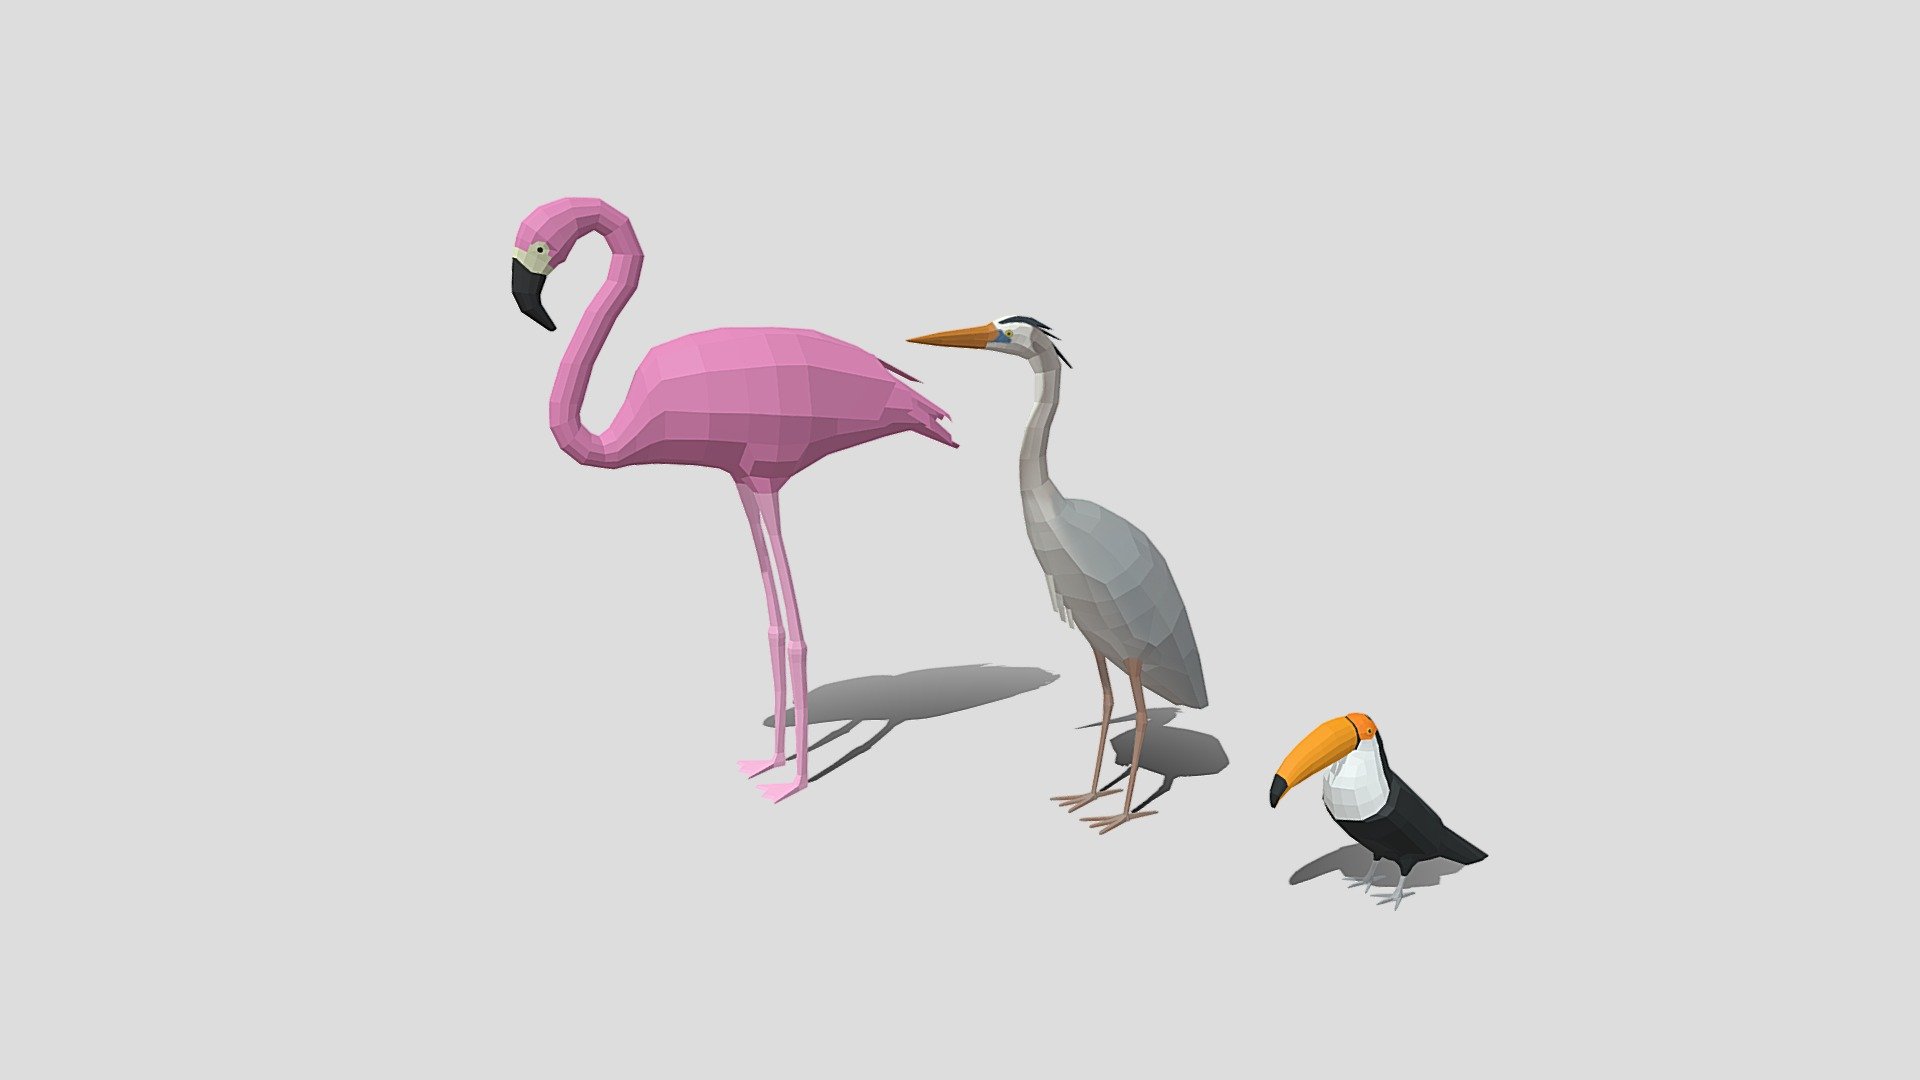 This is a low poly 3d collection of 3 exotic birds. The low poly birds was modeled and prepared for low-poly style renderings, background, general CG visualization presented as 3 meshes with quads only.

Low Poly Toucan Bird Verts : 832 Faces: 830

Low Poly Great Blue Heron Verts : 642 Faces: 634

Low Poly Flamingo Verts : Verts : 708 Faces: 692

PLEASE NOTE The Great Blue Heron has simple diffuse textures and UVMap, the Toucan and the Flamingo have simple diffuse colors.

No rig for all models.

The original files was created in blender. You will receive a 3DS, OBJ, FBX, blend, DAE, STL.

Warning: Depending on which software package you are using, the exchange formats (.obj, .3ds, .dae .fbx) may not match the preview images exactly. Due to the nature of these formats, there may be some textures that have to be loaded by hand and possibly triangulated geometry 3d model